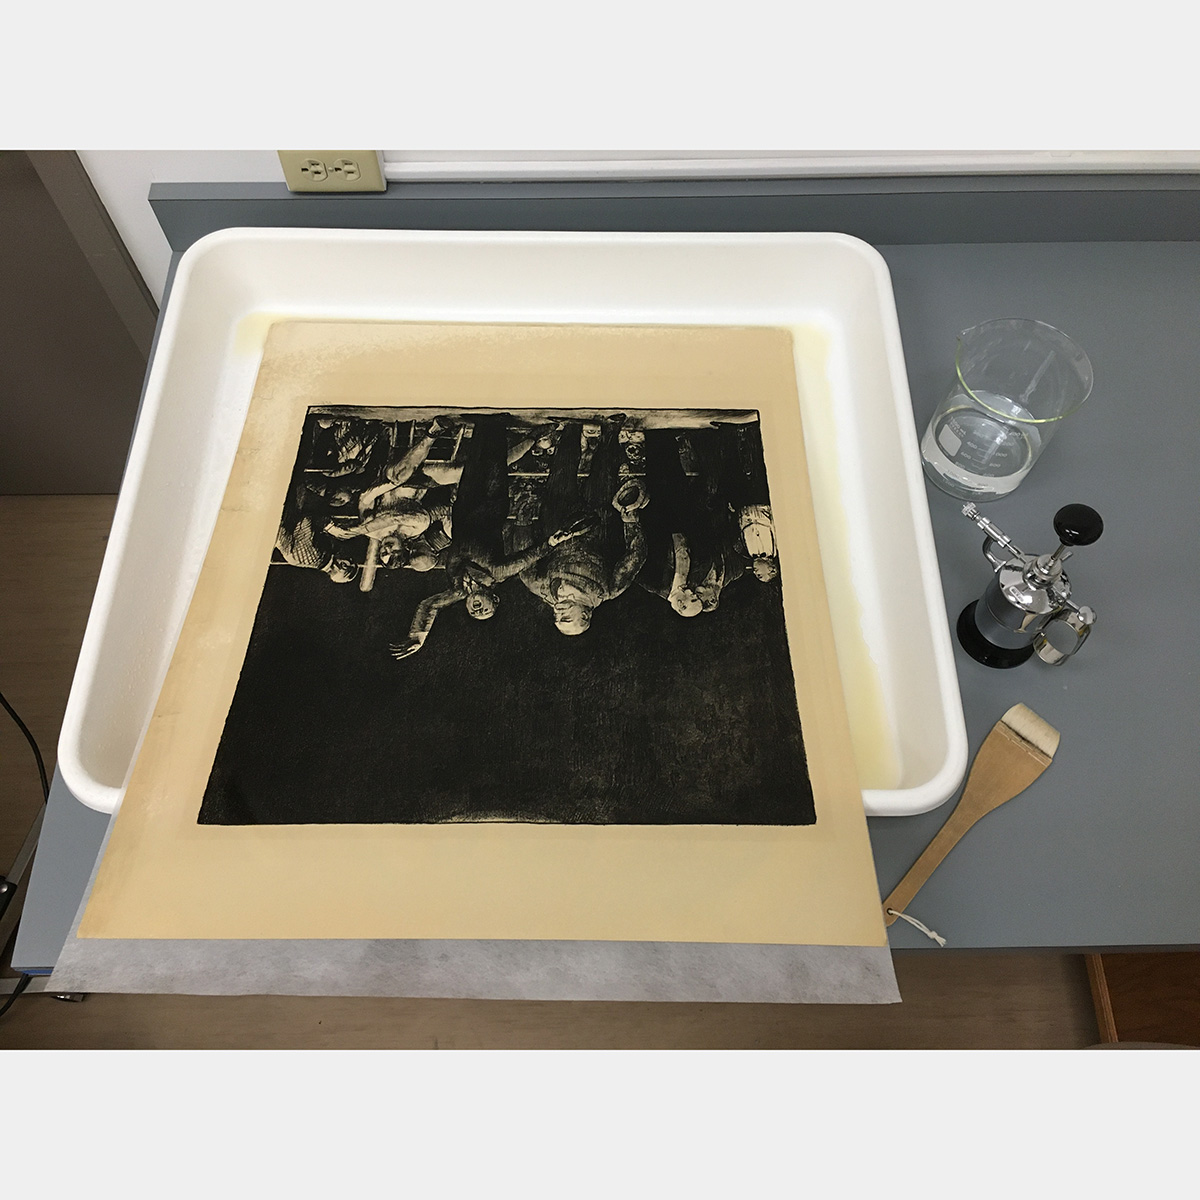 A yellowed print sits in a large white plastic tub